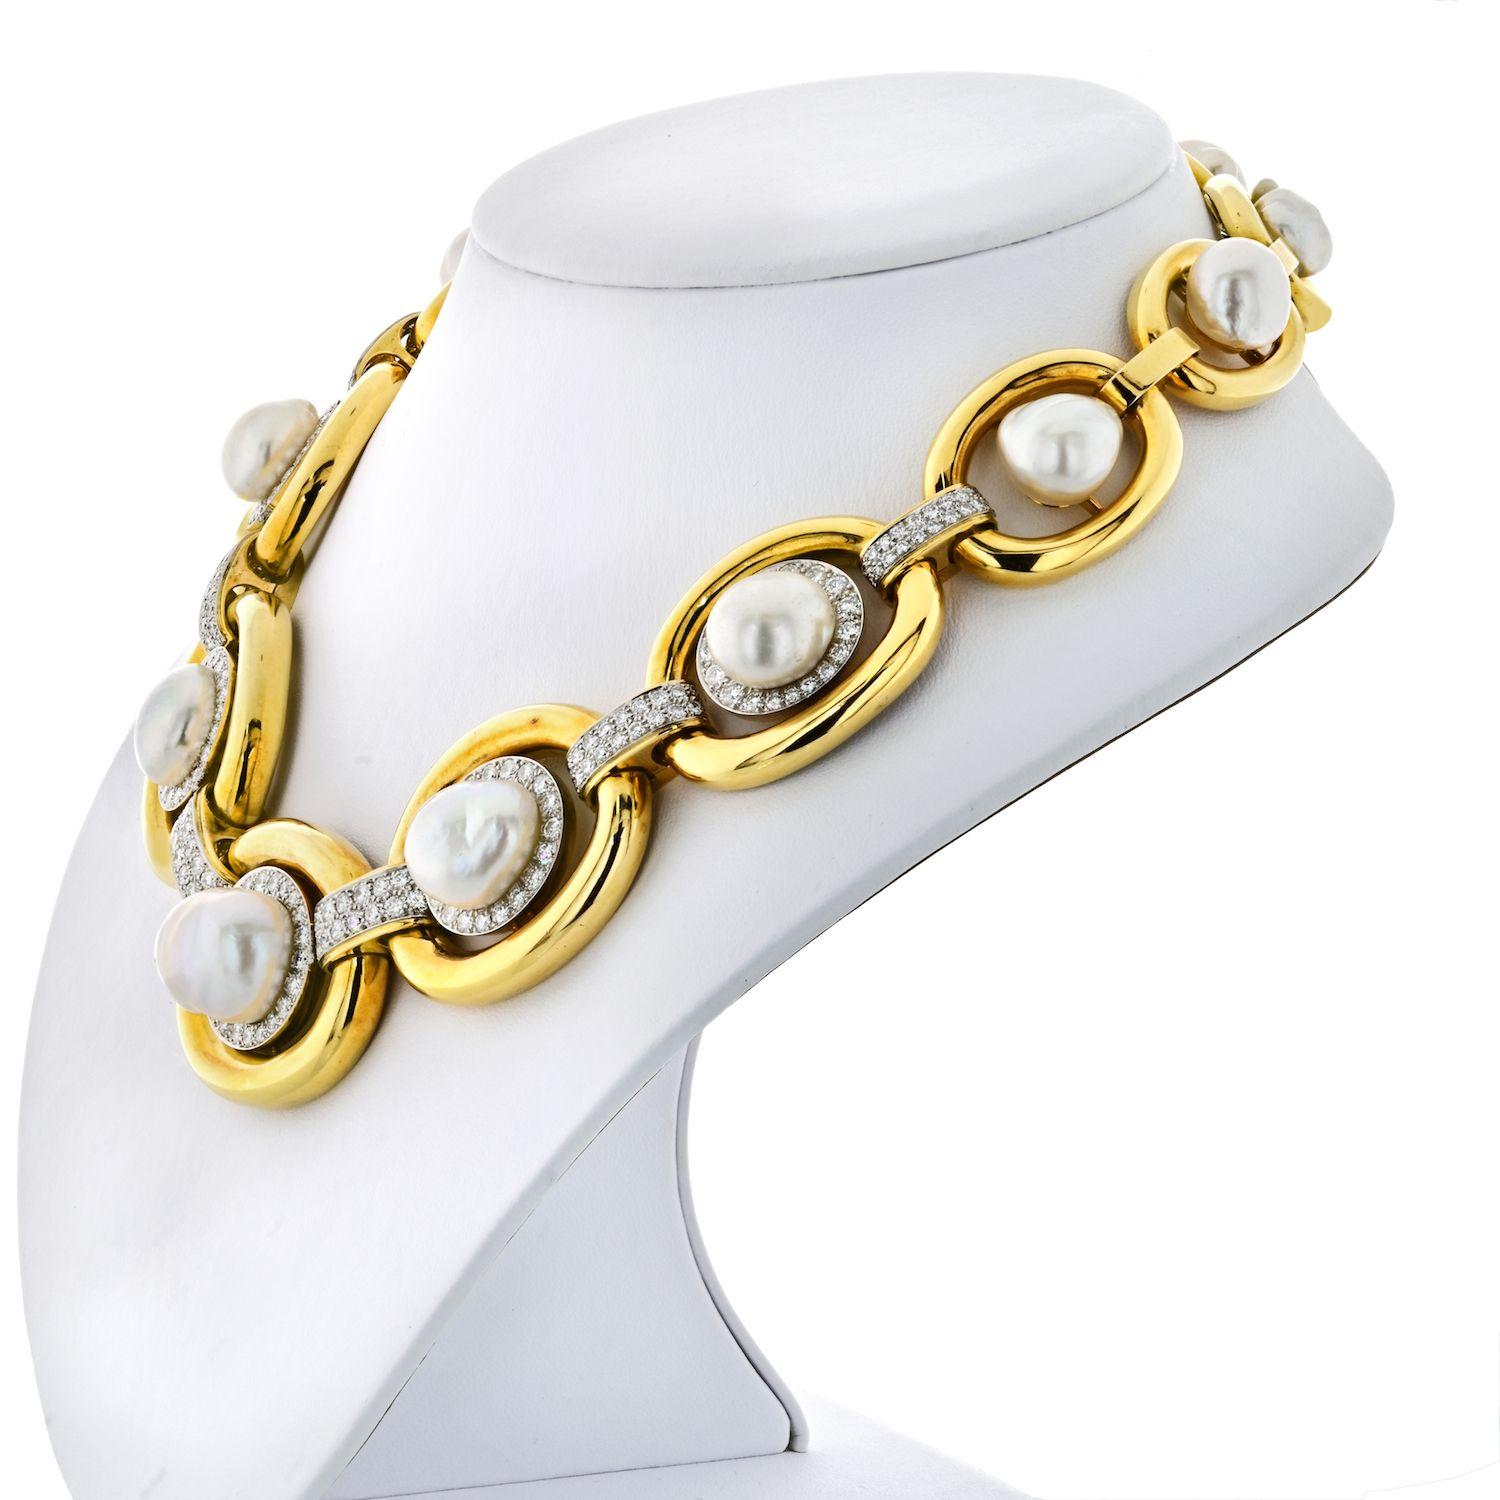 Yellow Gold David Webb pearl and diamond open oval link collar necklace will make any outfit pop. Large gold links with high polish finish and a touch of diamonds around front pearls and in between stations speak class and sophistication. Best of